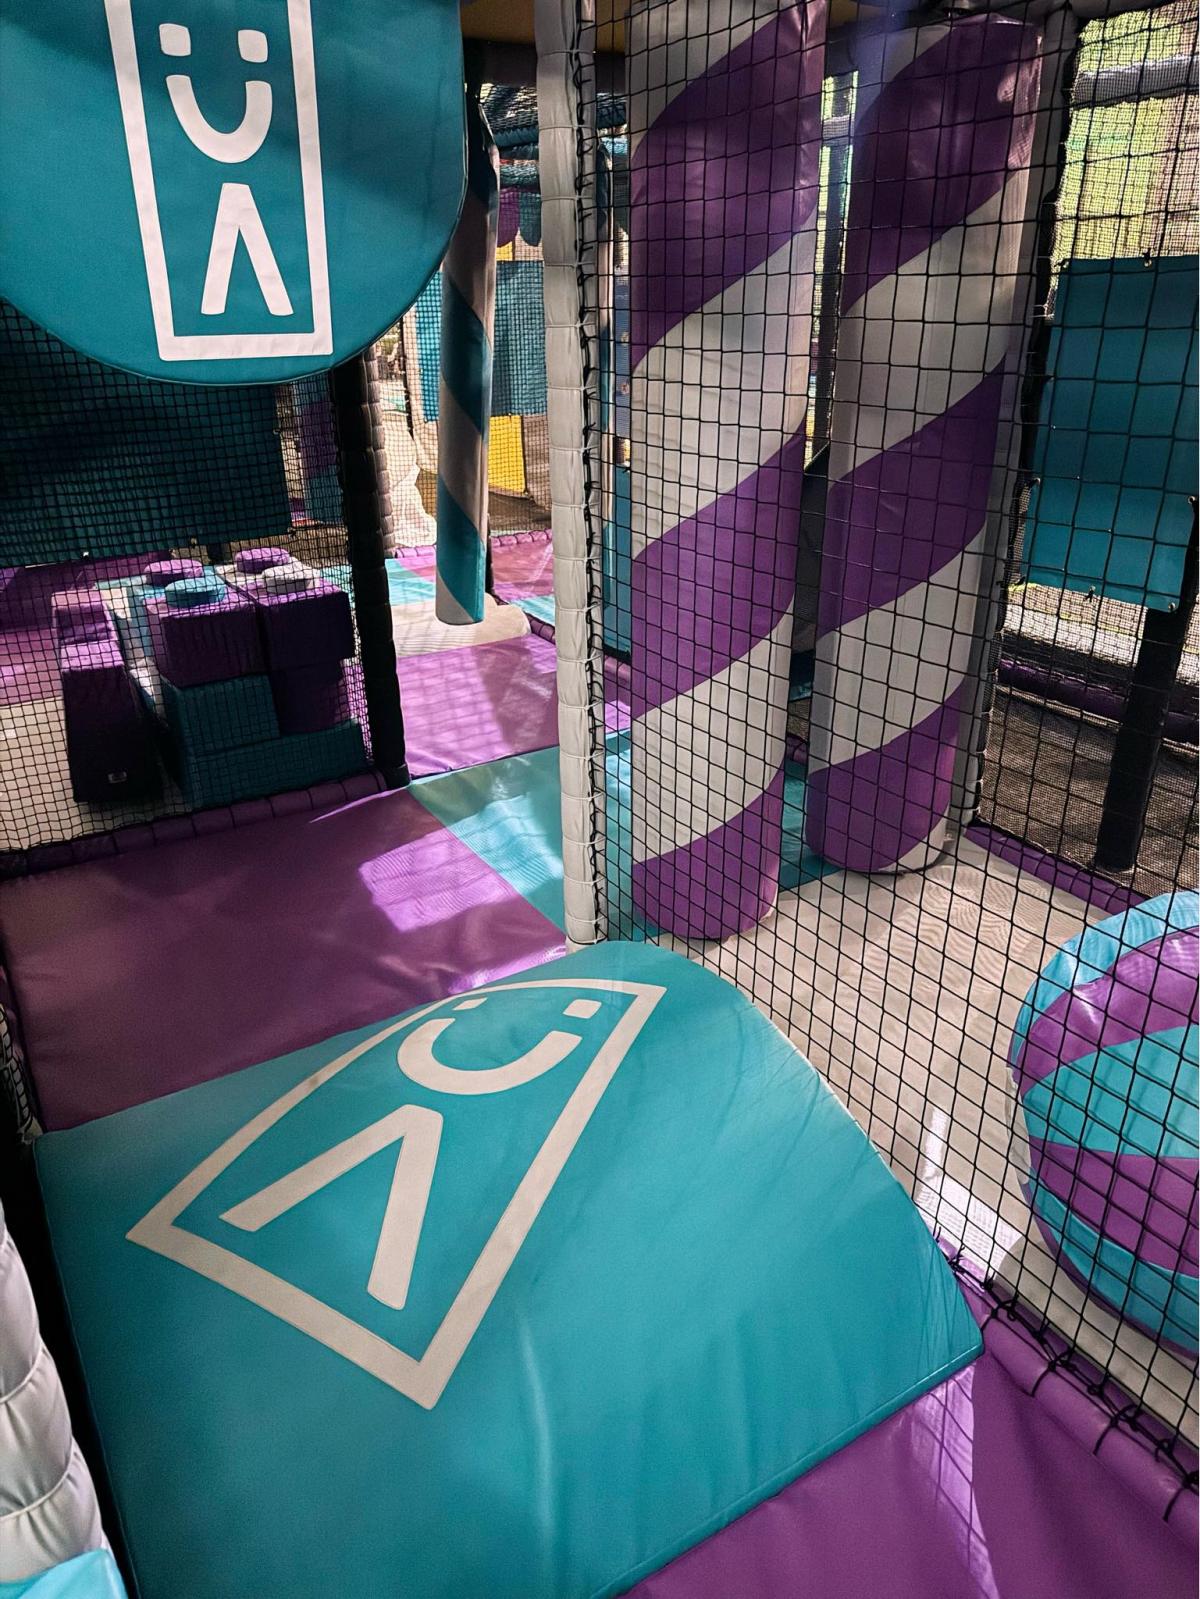 UA Trampoline Park in Winsford opens new soft play area